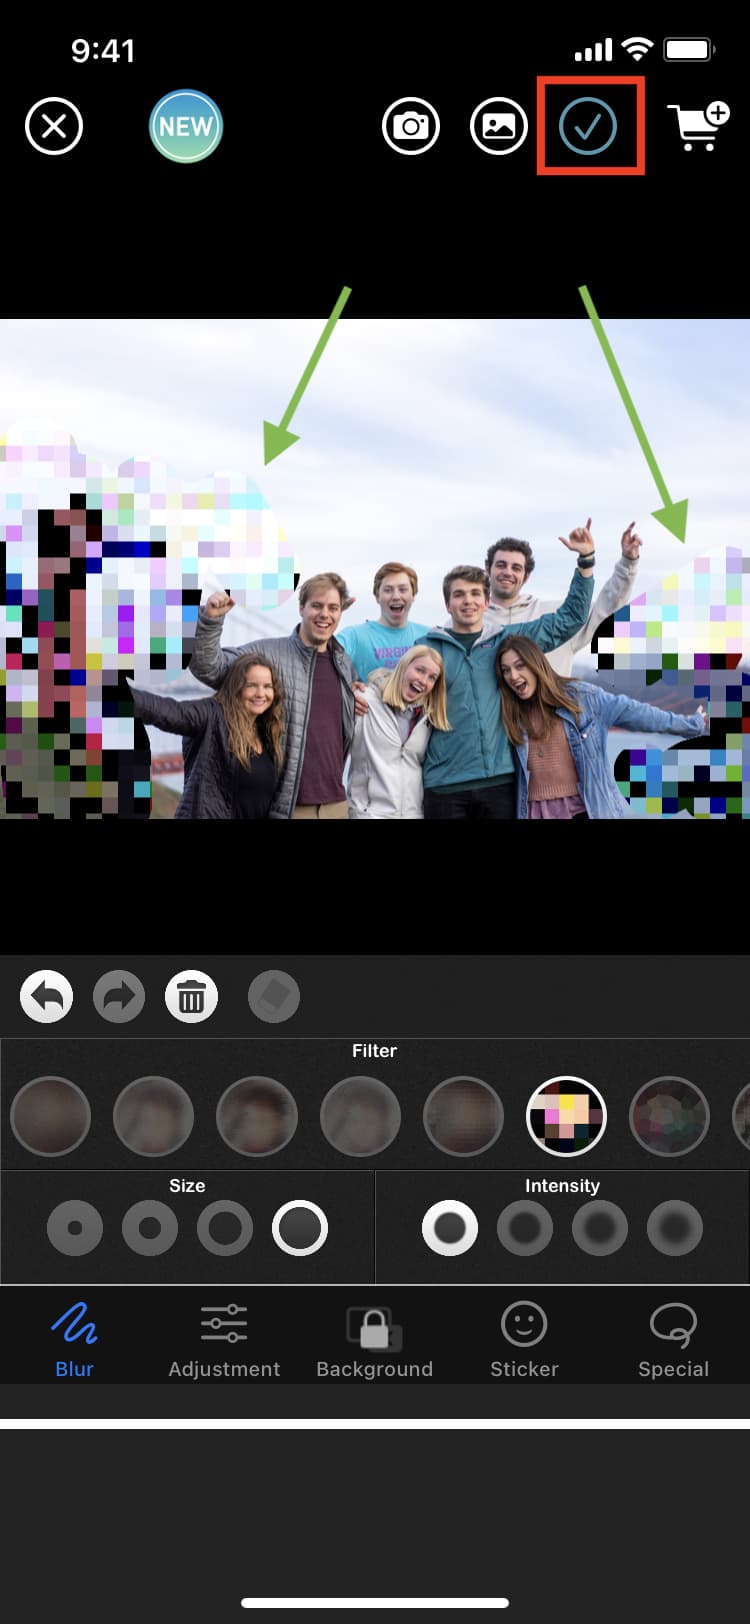 Add pixelate or blur effect and save final image to iPhone Photos app